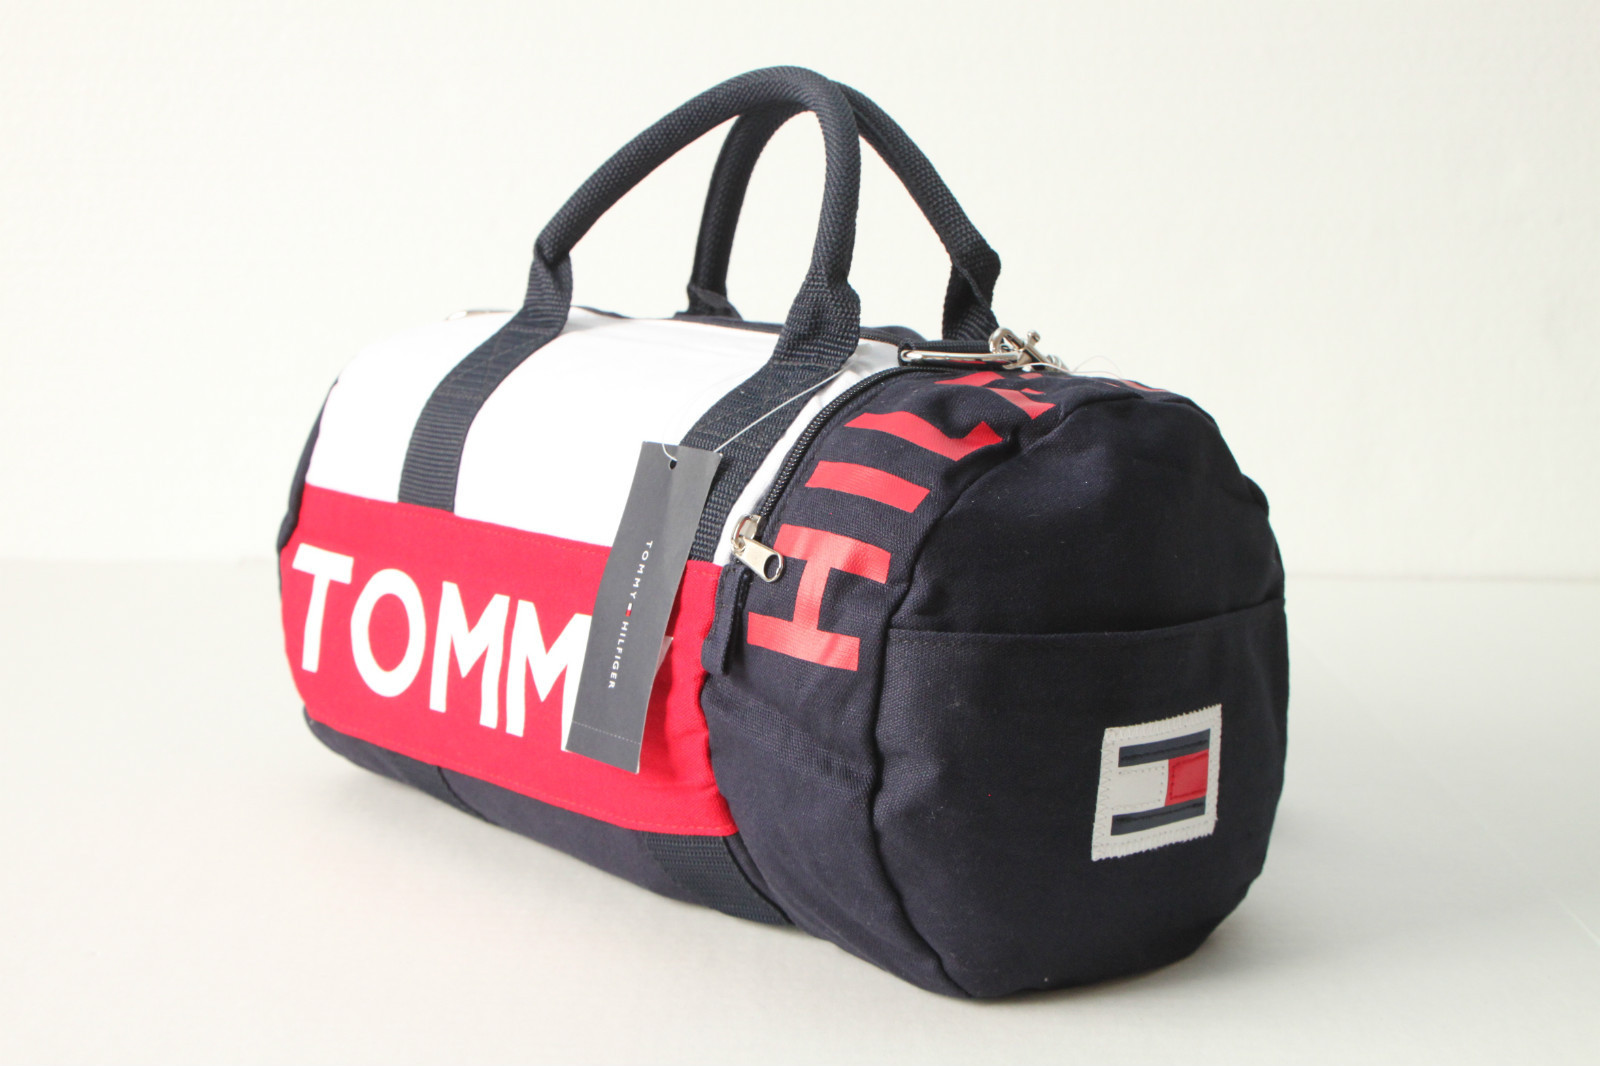 Boutique Malaysia: TOMMY HILFIGER SMALL GYM DUFFLE